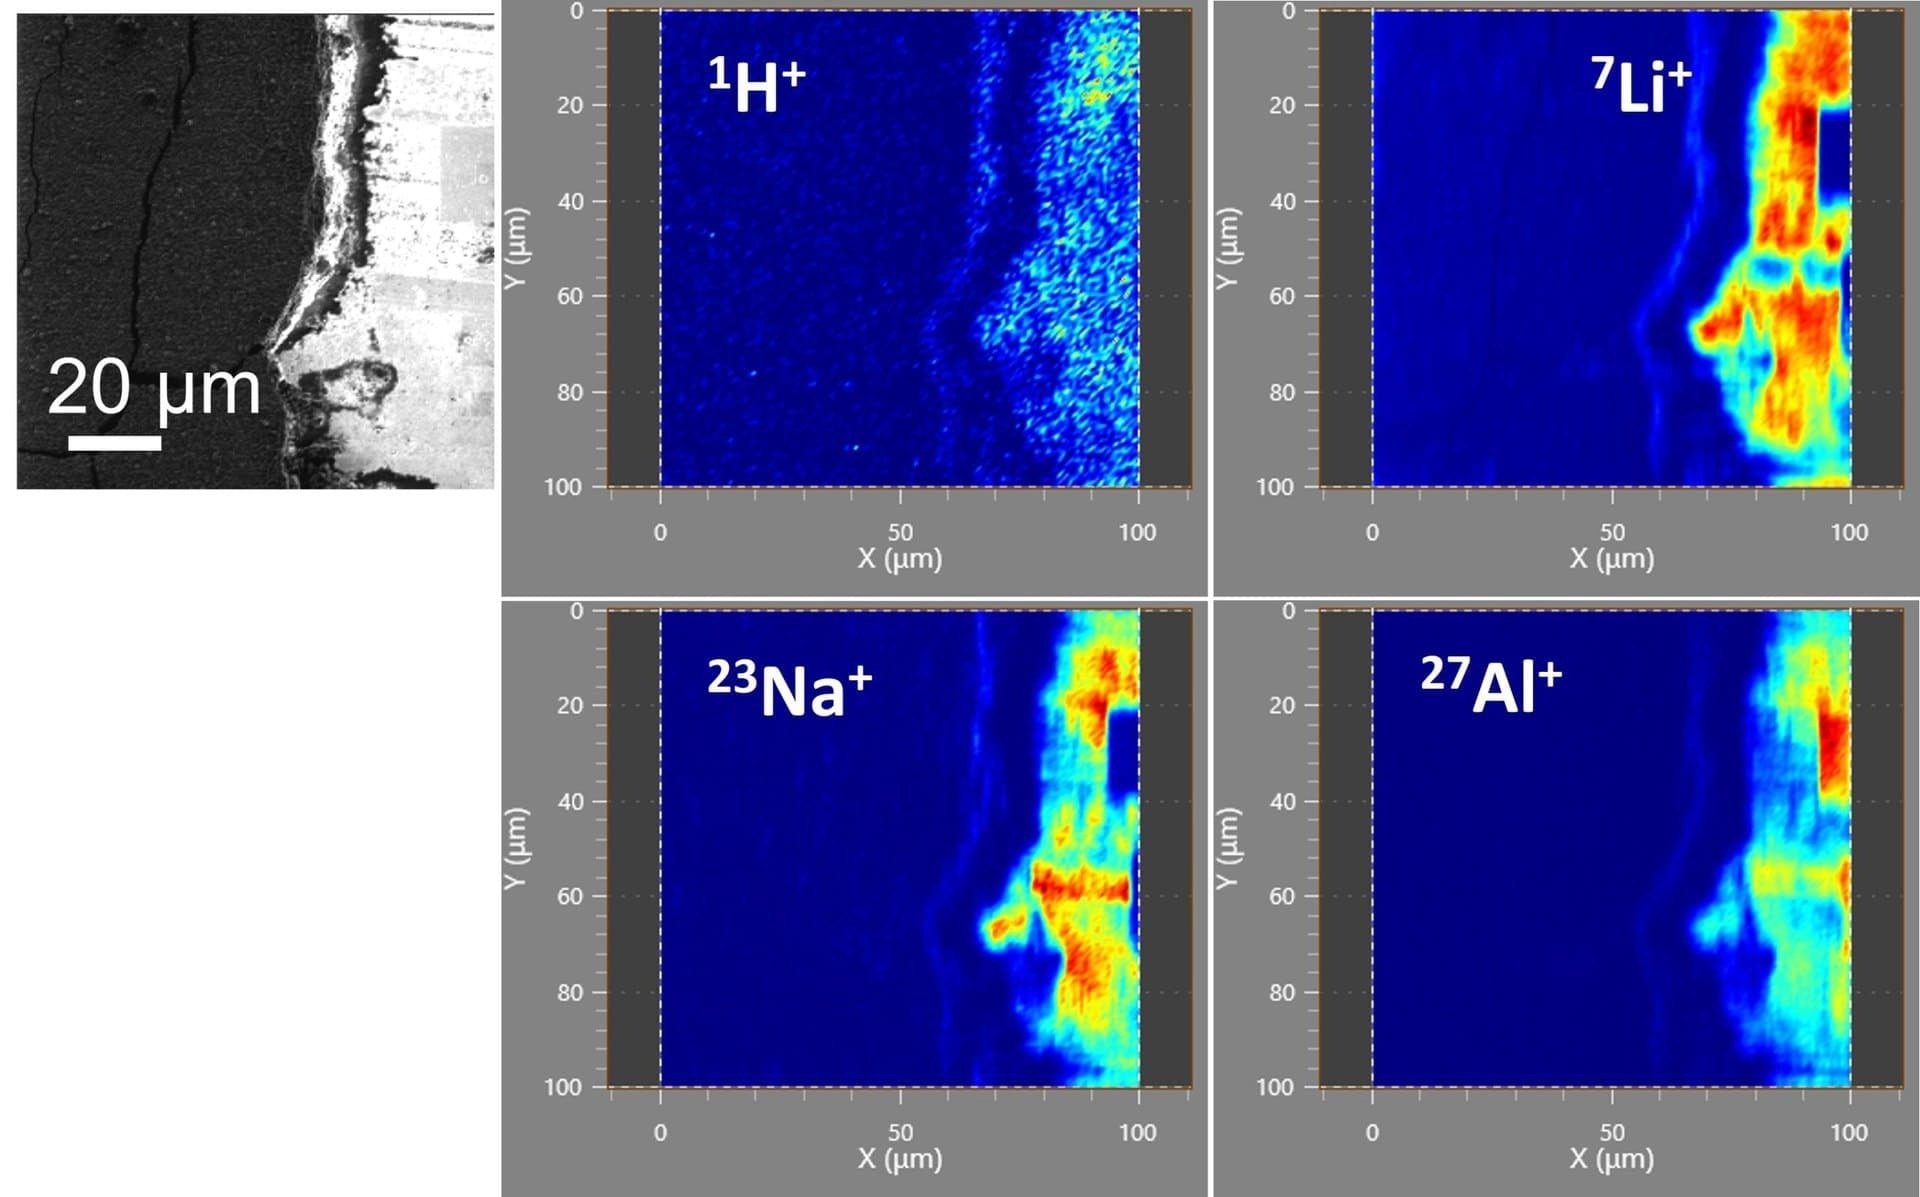 FIB induced secondary electron image on the left and secondary ion elemental maps of H, Li Na and Al on the right